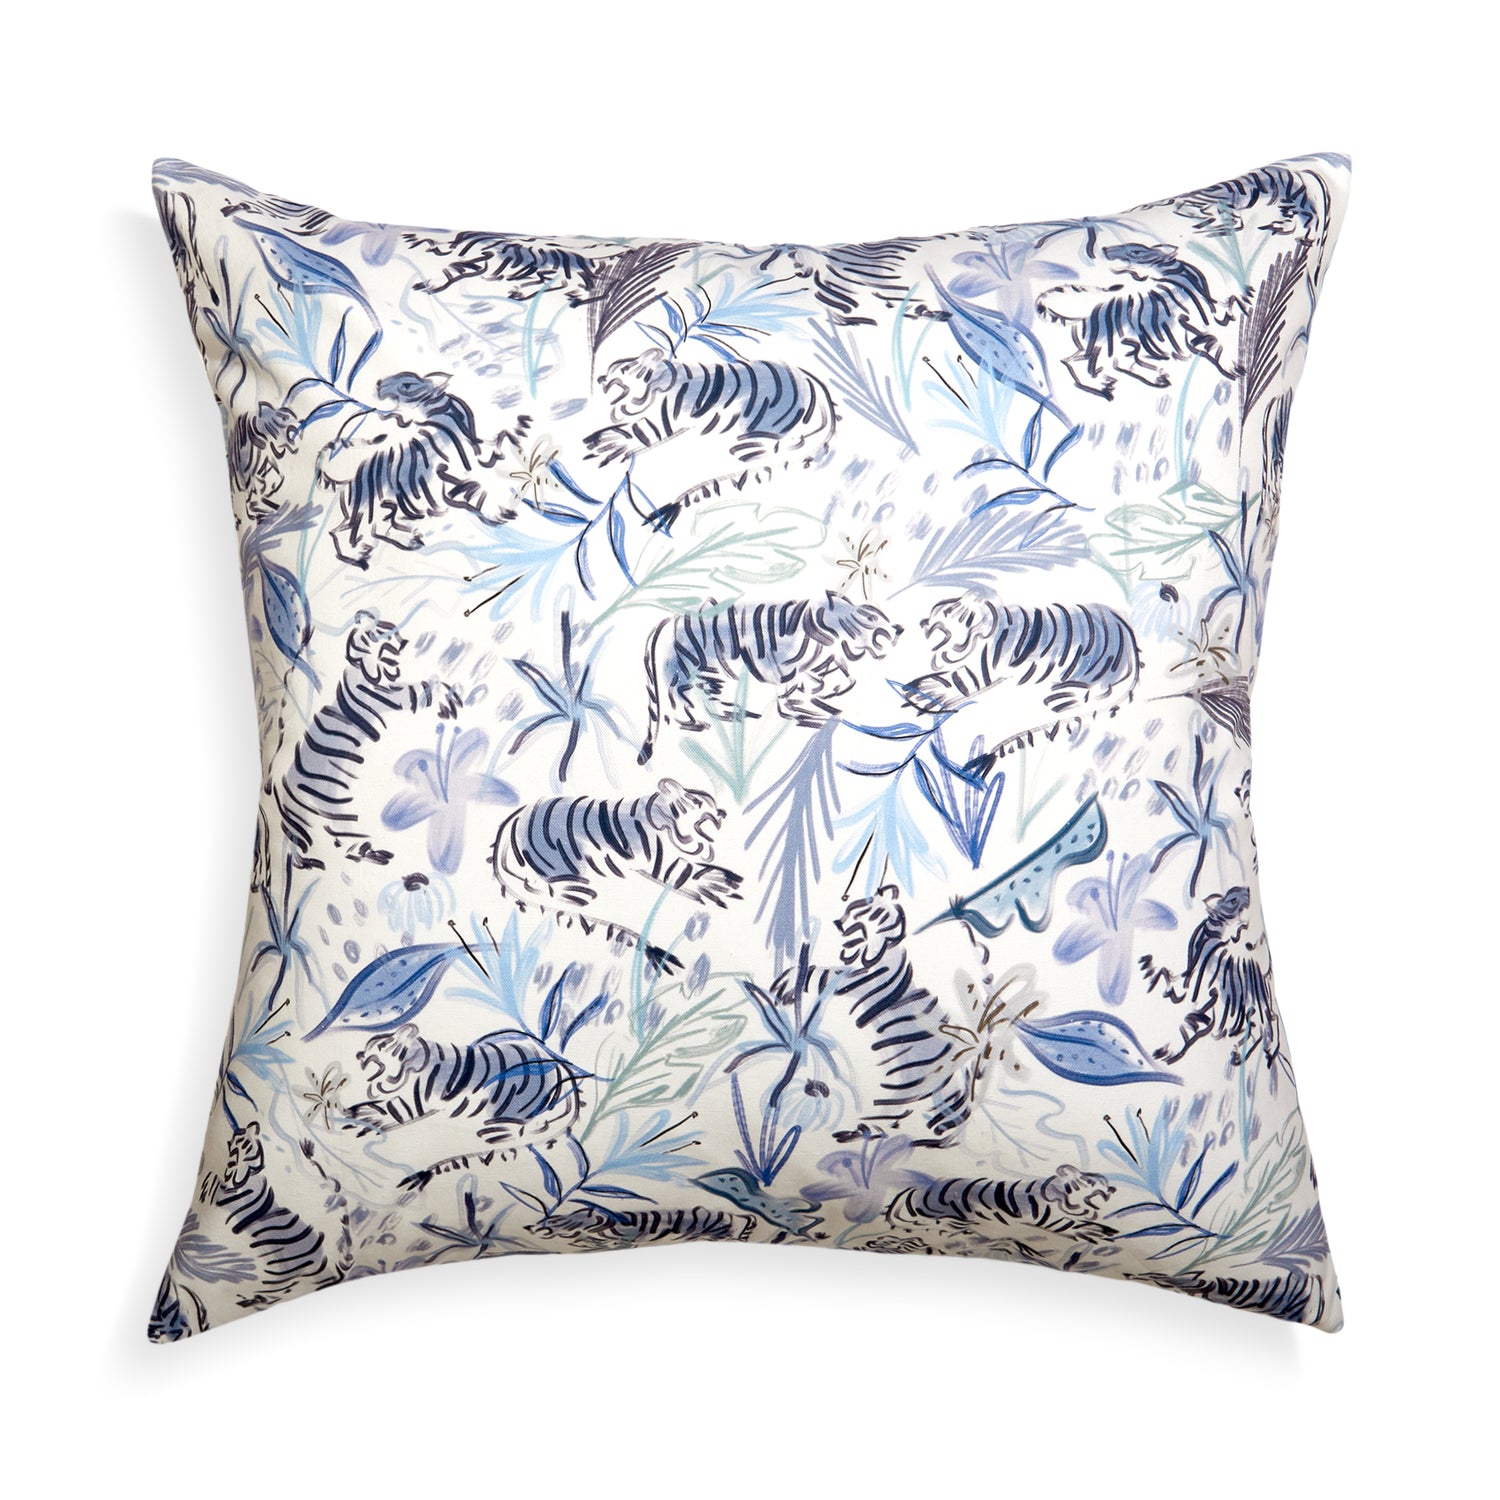 Blue With Intricate Tiger Design Printed Pillow